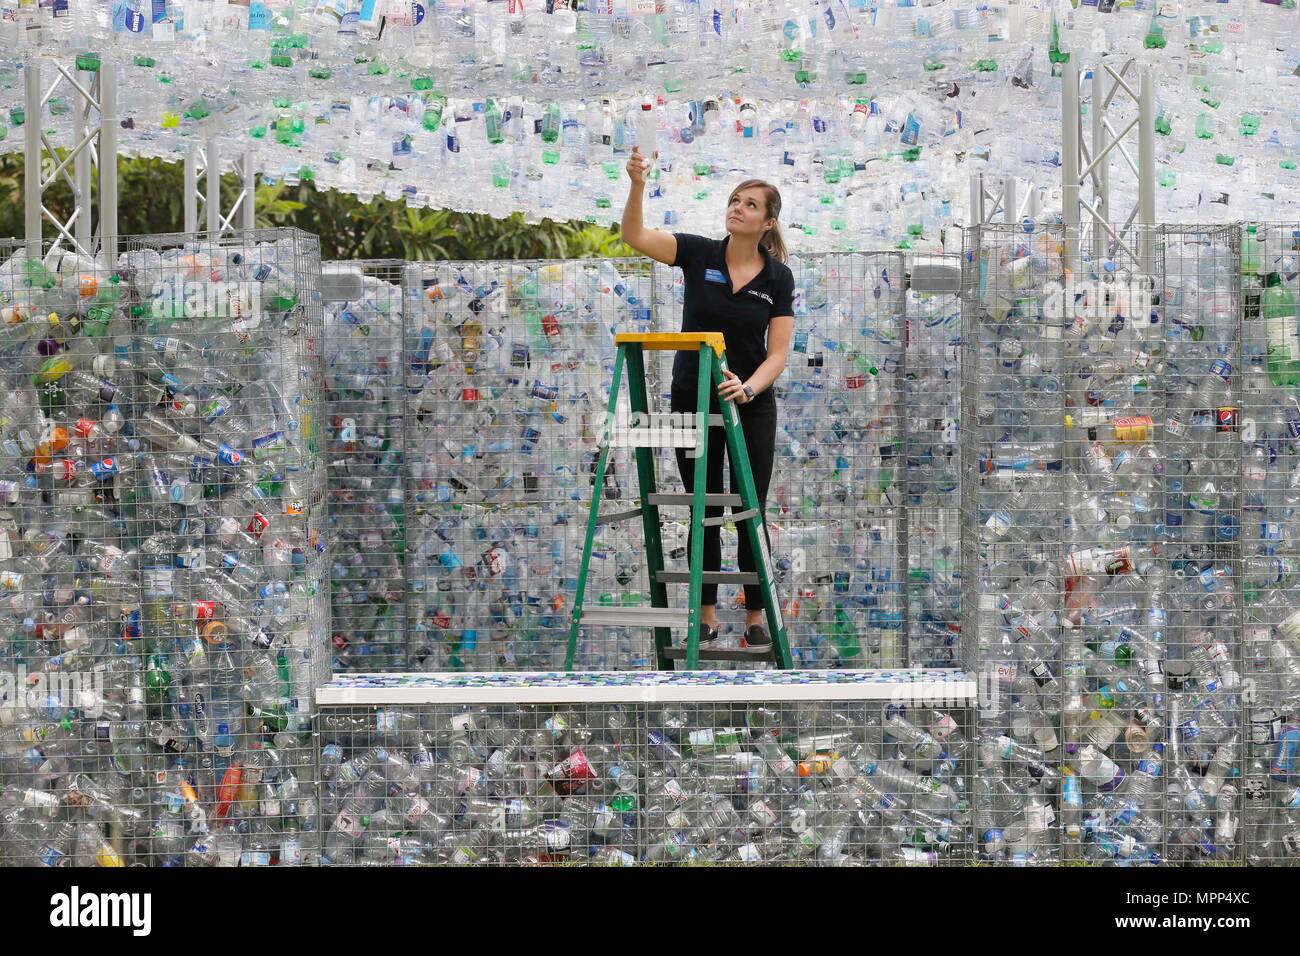 London, ZSL London Zoo in London. 24th May, 2018. Fiona Llewellyn, marine project manager at ZSL, poses for a picture adding a plastic bottle to the work the Space of Waste, an art installation highlighting the problem of plastic pollution, at ZSL London Zoo in London, Britain on May 24, 2018. The work, by artist and architect Nick Wood, is 16 feet high and is made from 15,000 discarded single use plastic bottles collected from London and its rivers. Credit: Tim Ireland/Xinhua/Alamy Live News Stock Photo